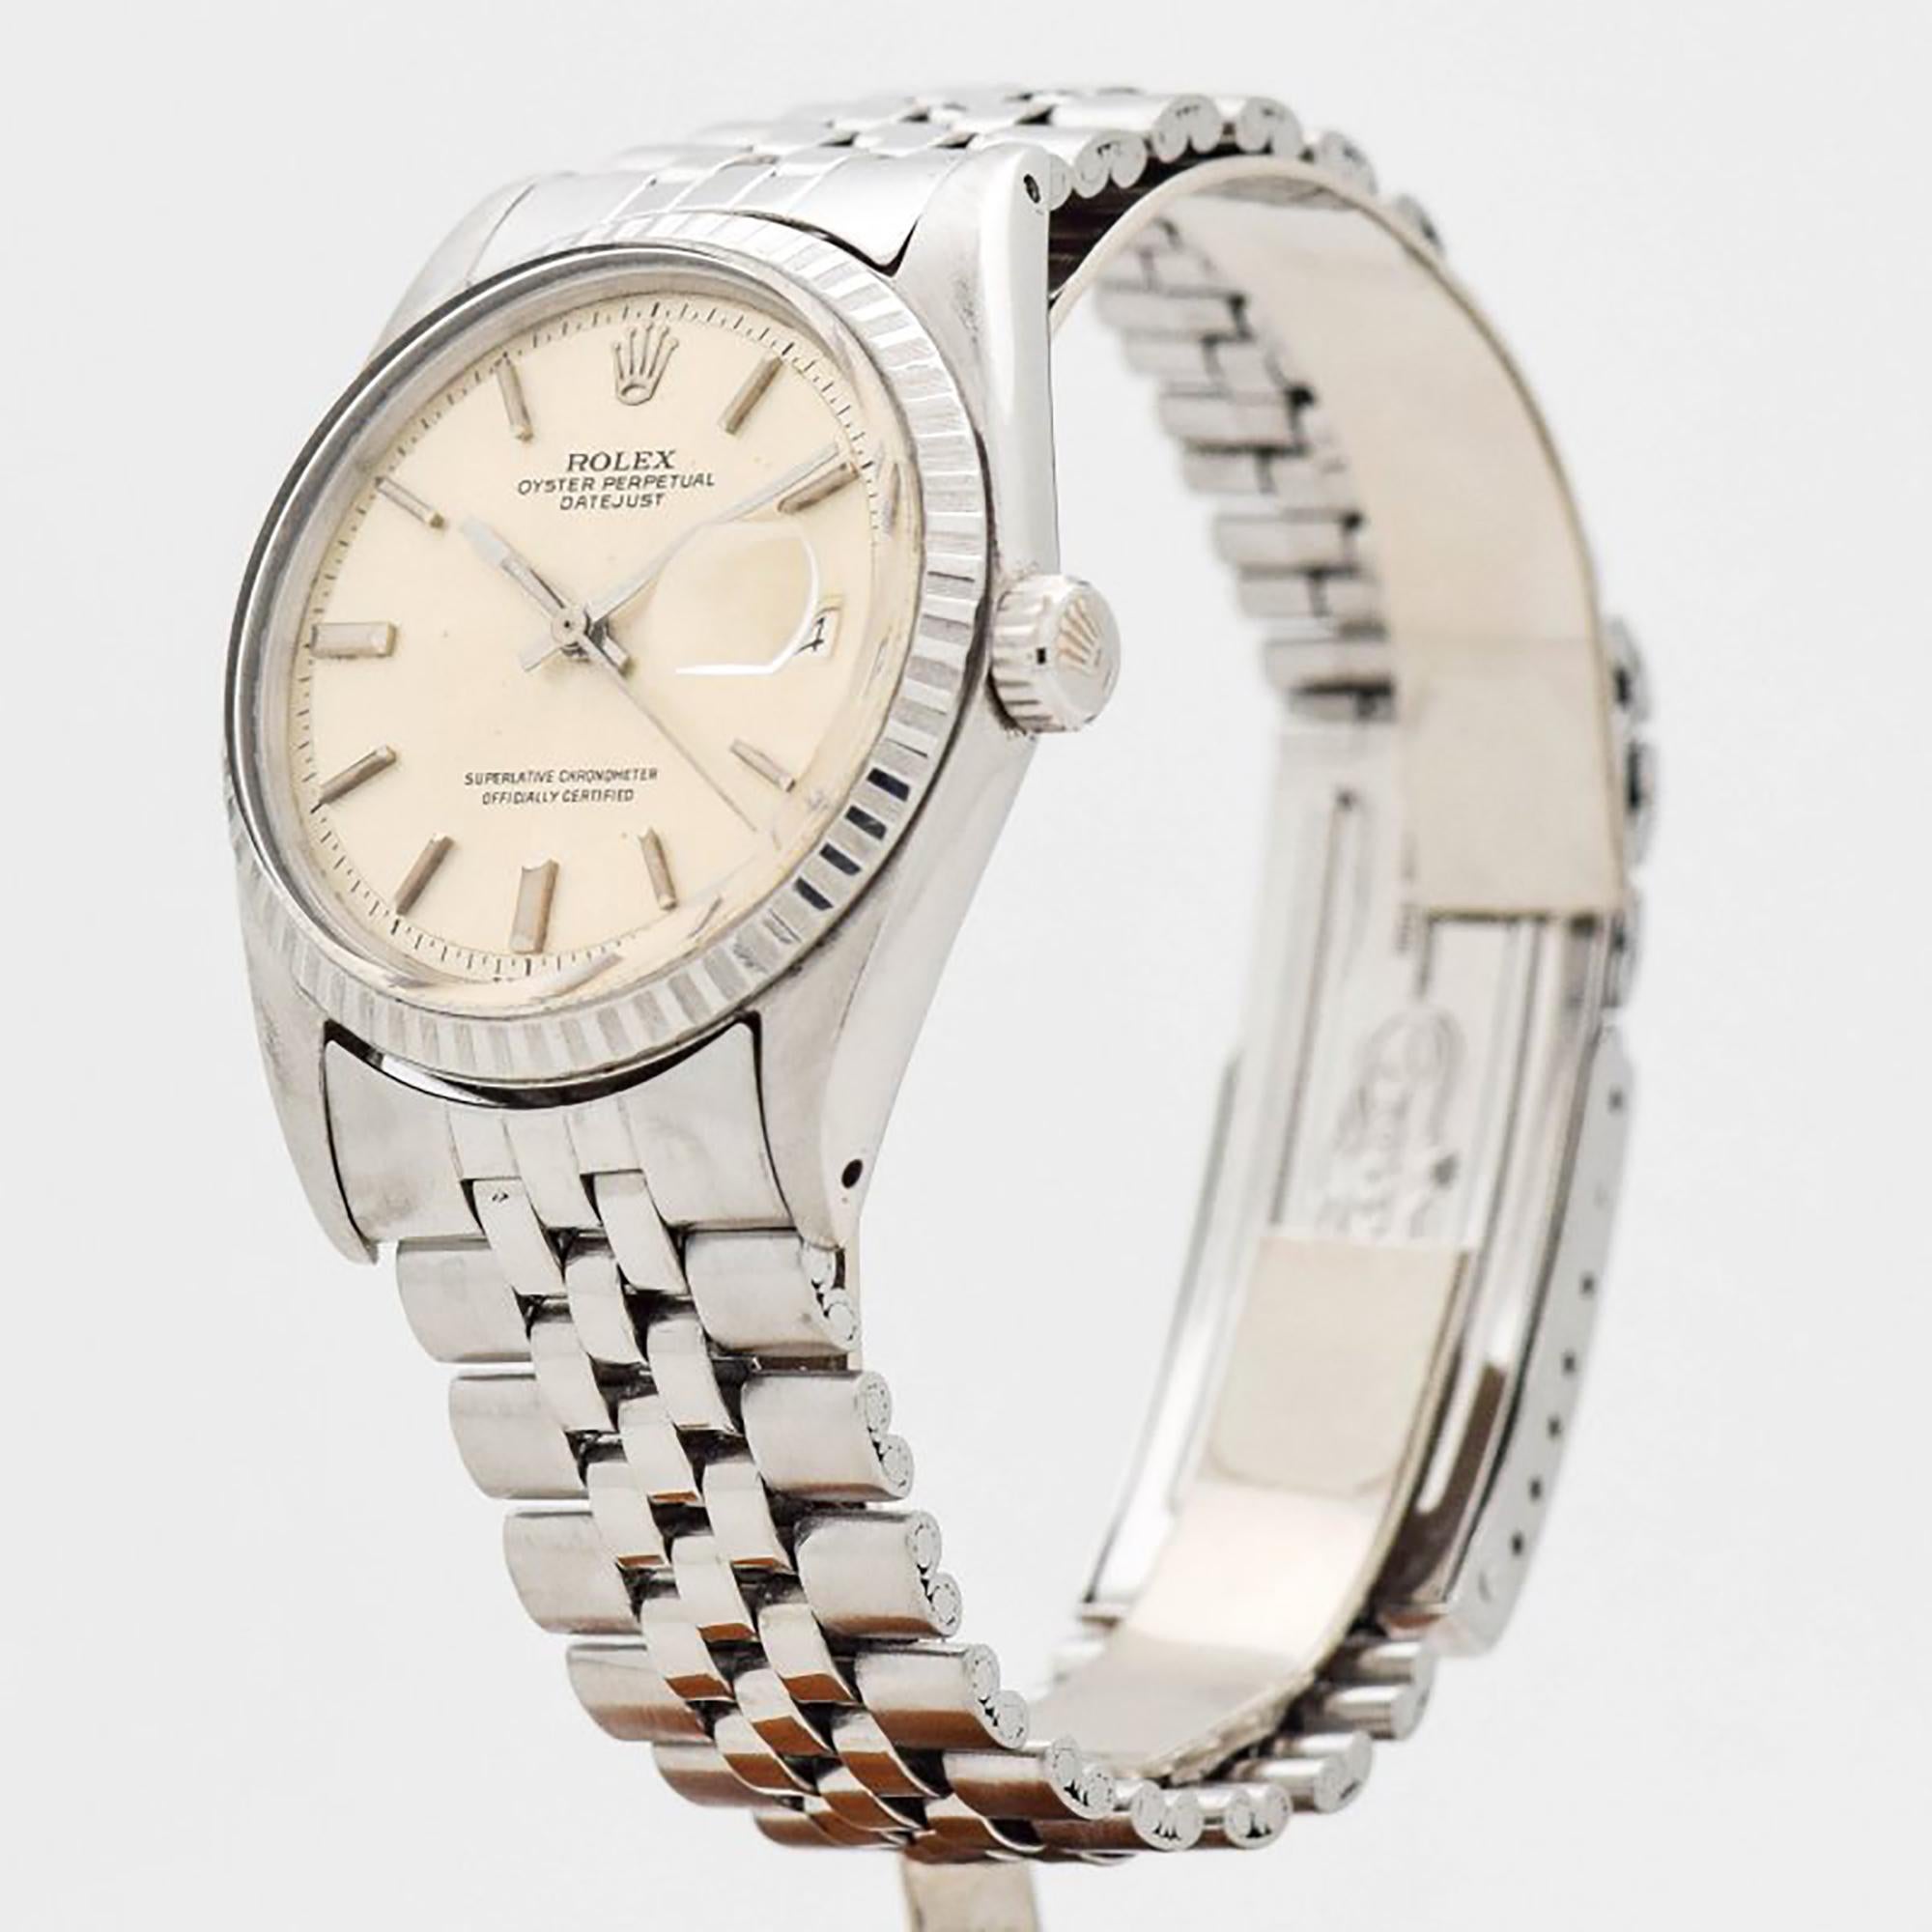 1967 Vintage Rolex Datejust Ref. 1603 Stainless Steel watch with Stainless Steel Fluted Bezel with Original Silver Dial with Applied Steel Bar Markers with Original Rolex Stainless Steel Jubilee Bracelet. Case size, 36mm x 44mm lug to lug (1.42 in.